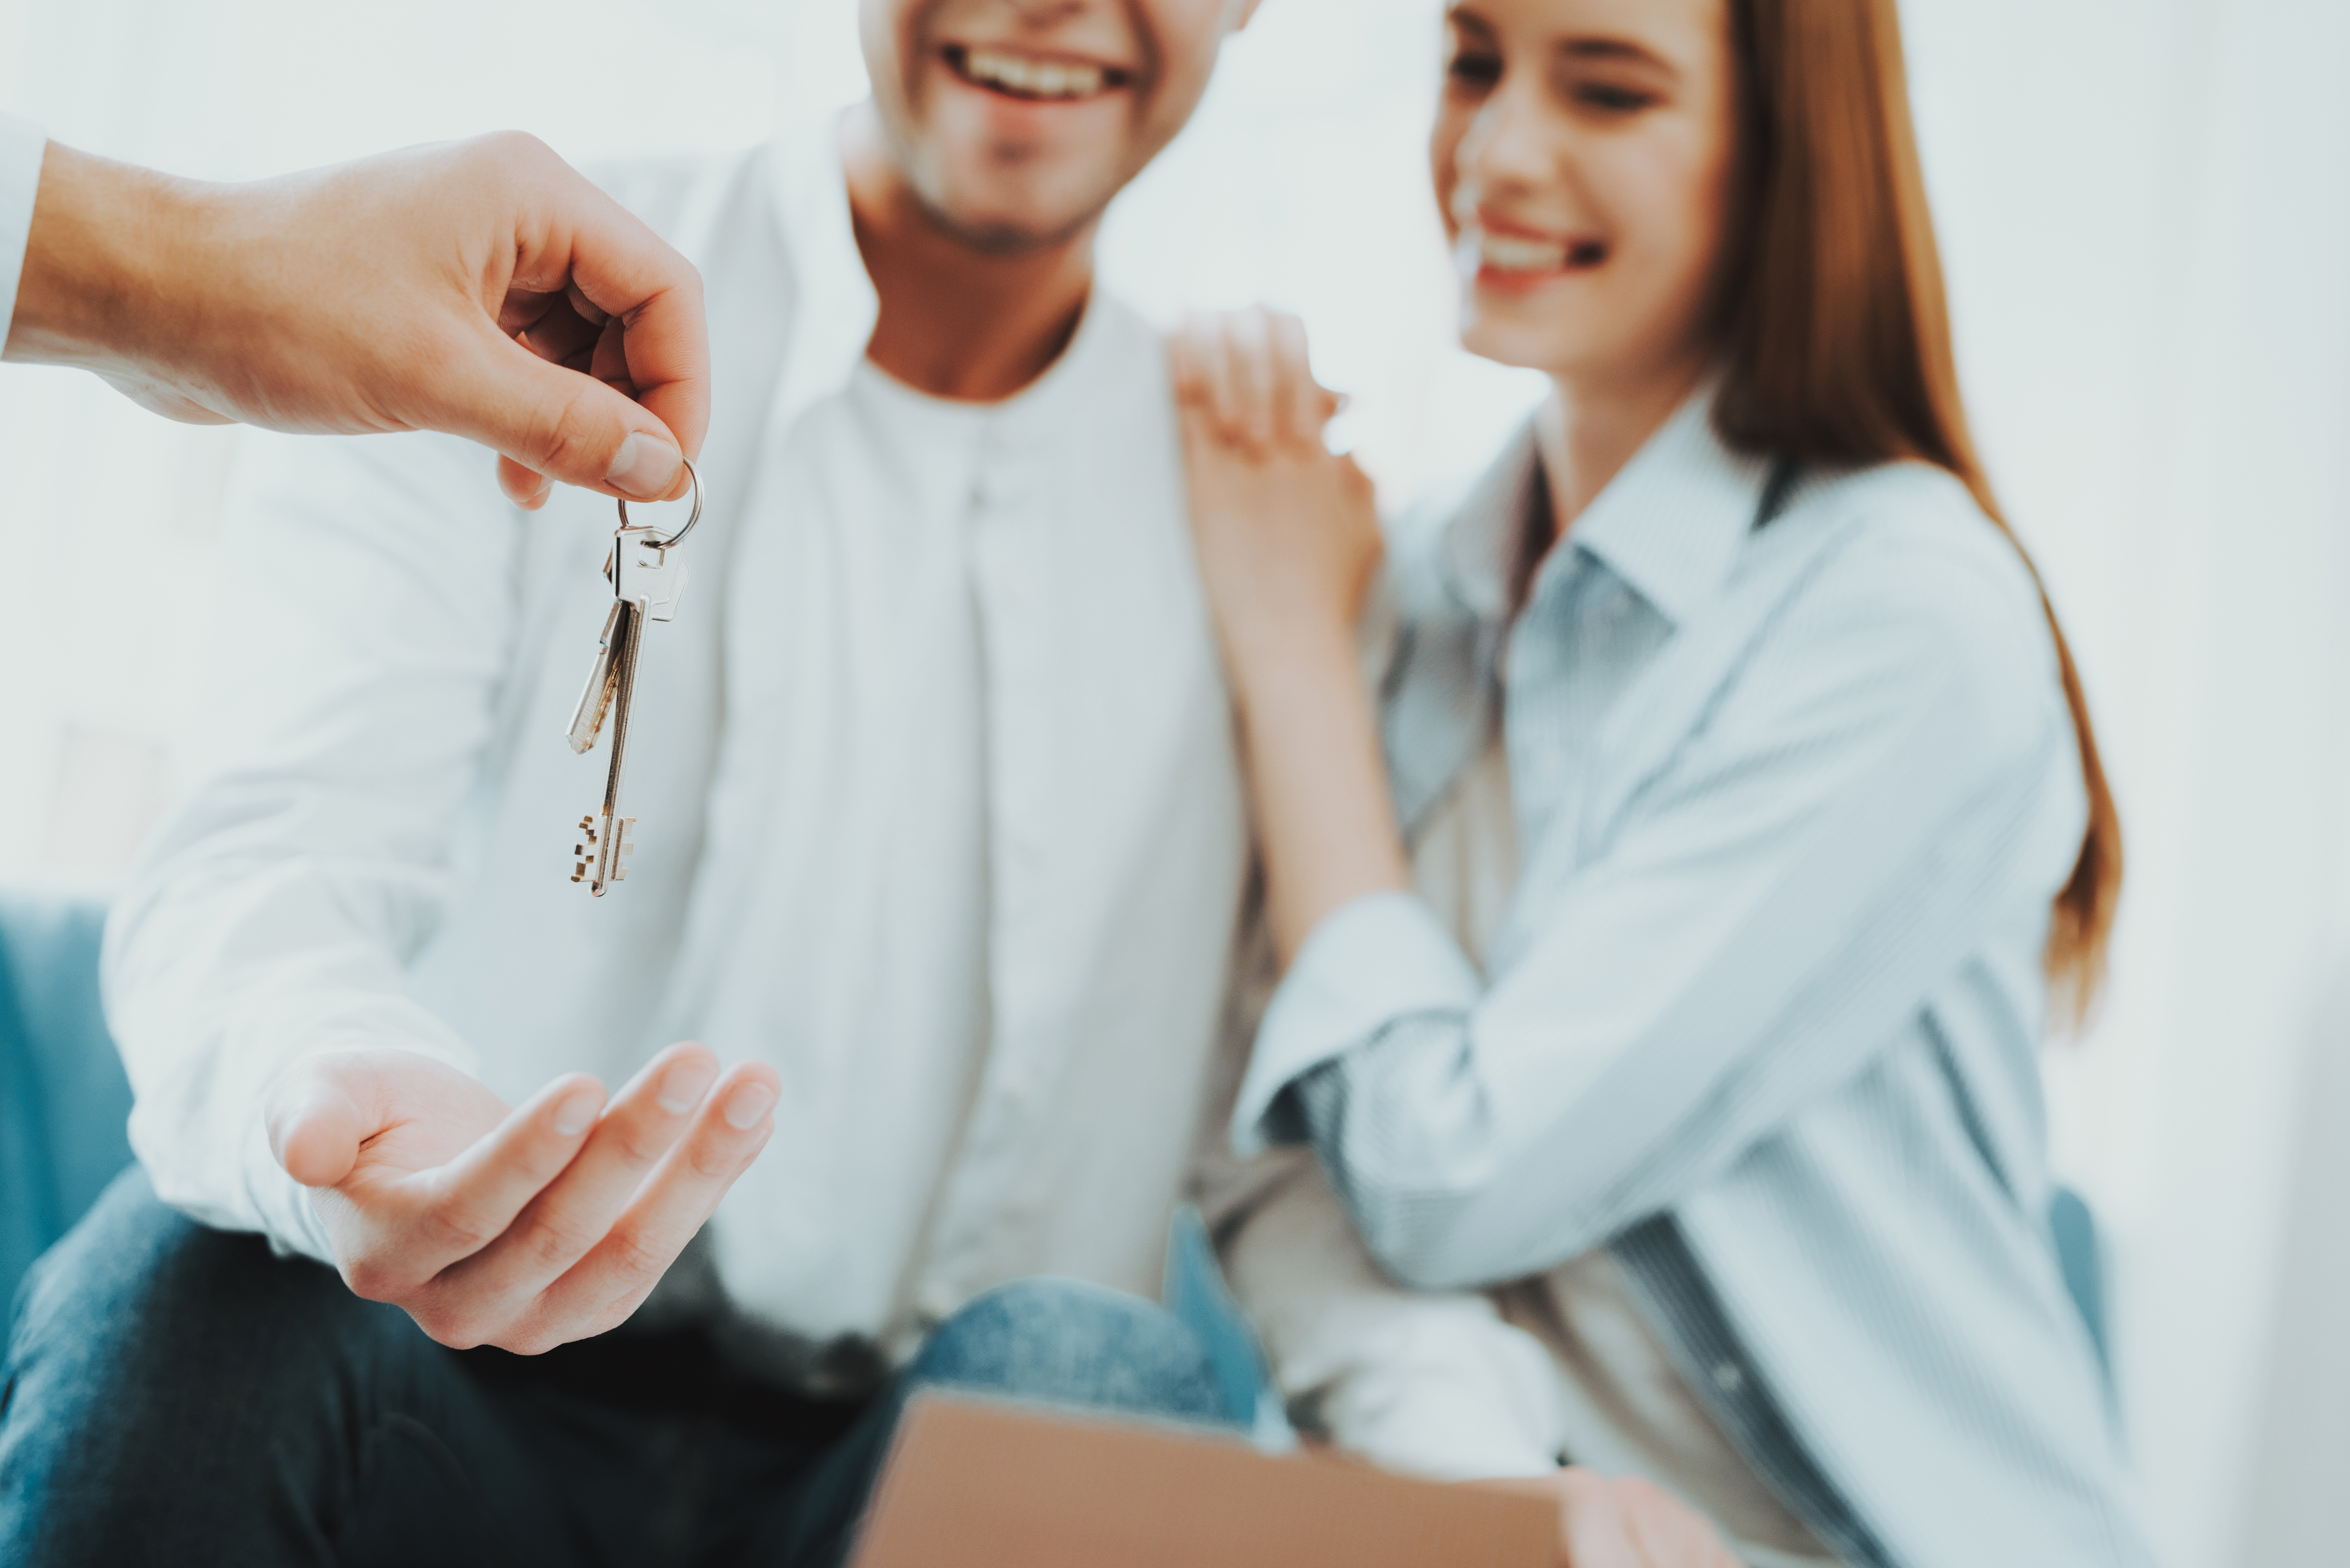 A man hands house keys to a man and woman.